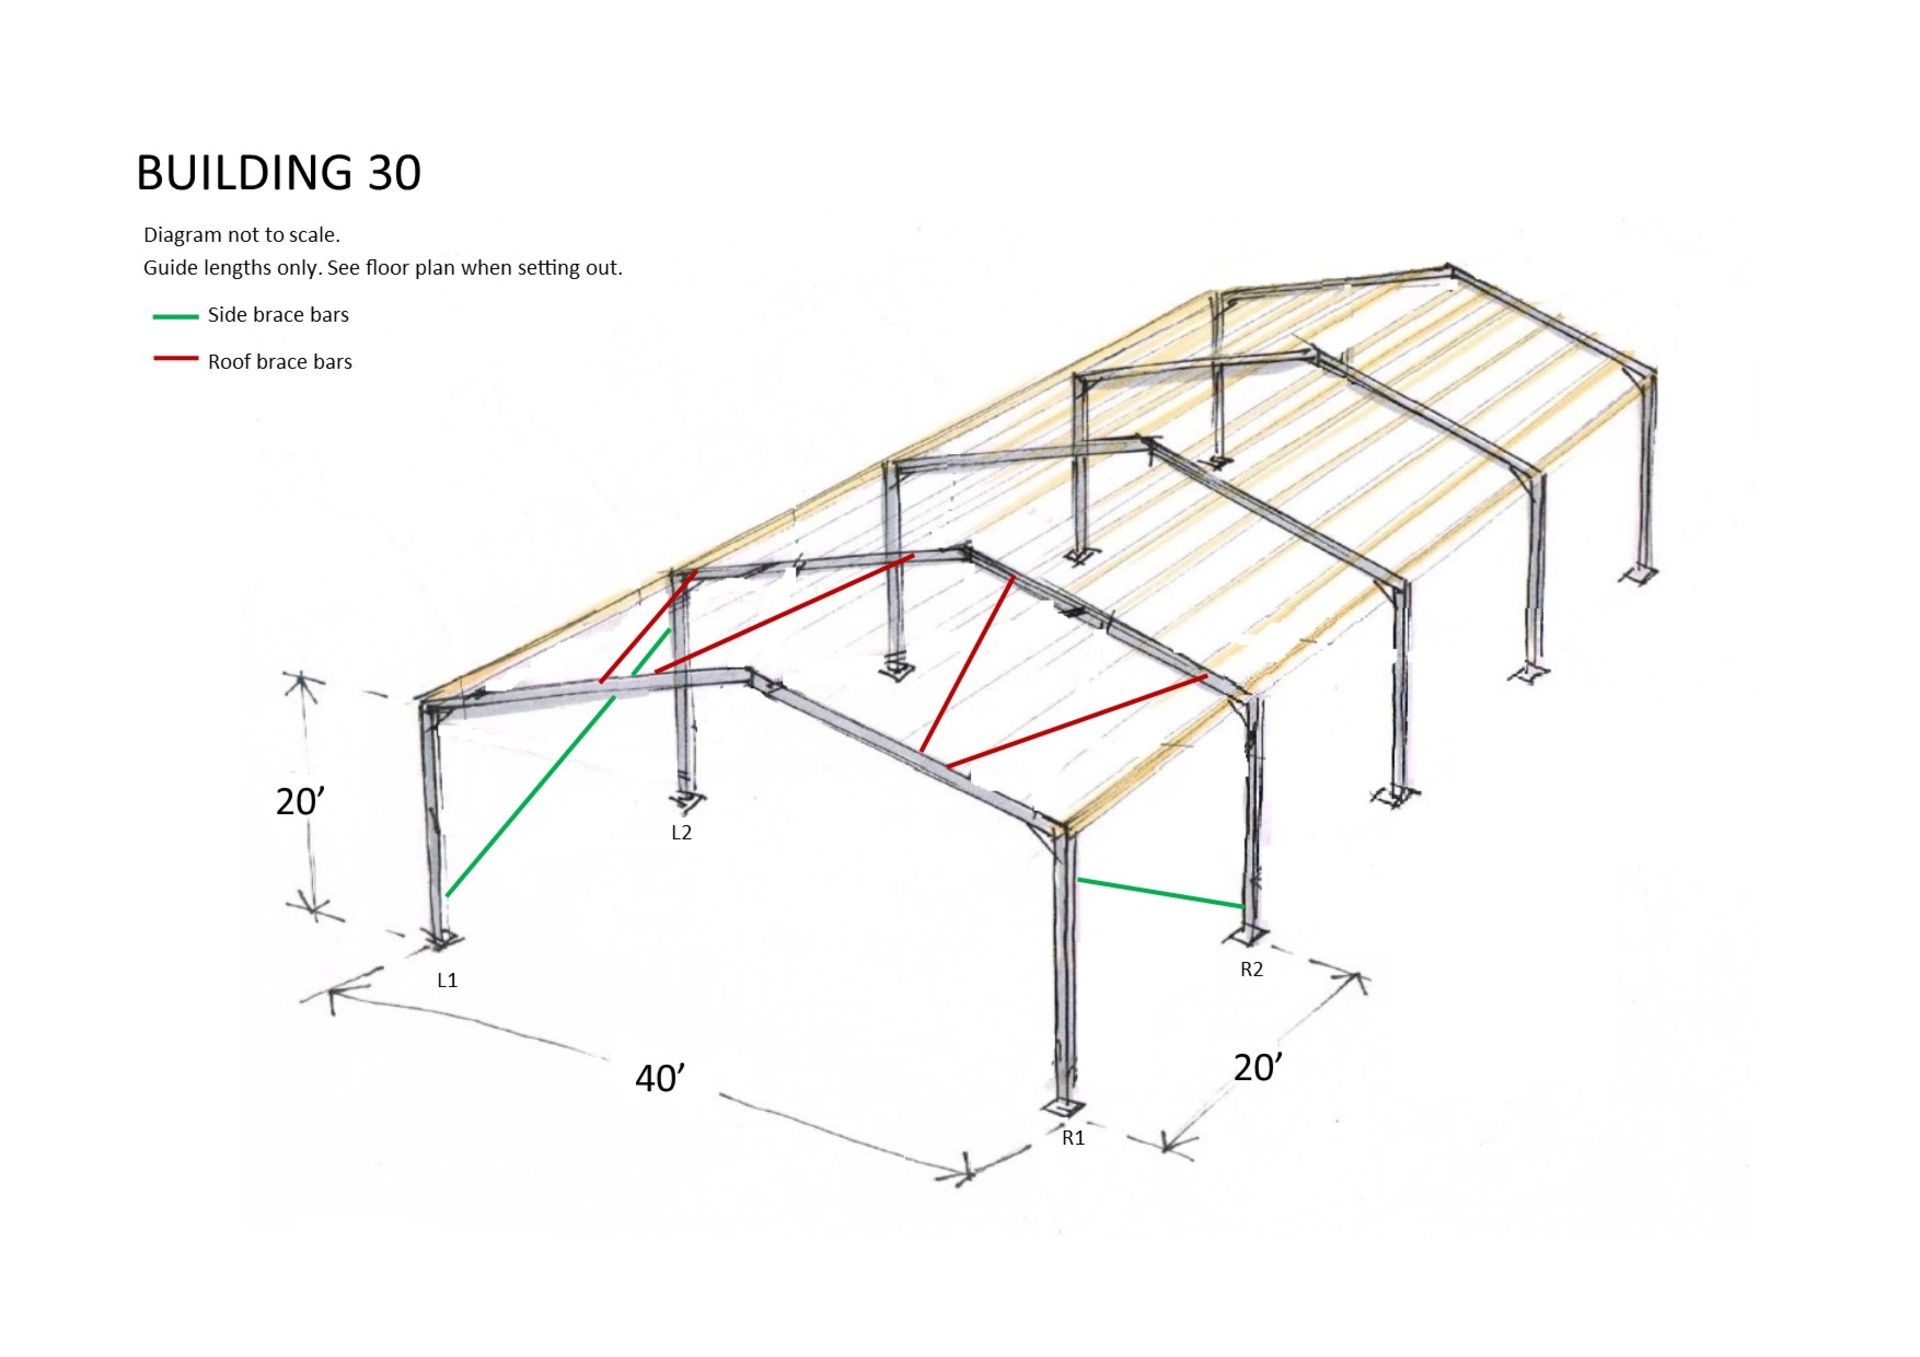 Steel framed building 80ft long x 40 ft wide x 13ft 6 inches @ eaves 12 .5 deg roof pitch - Image 7 of 8